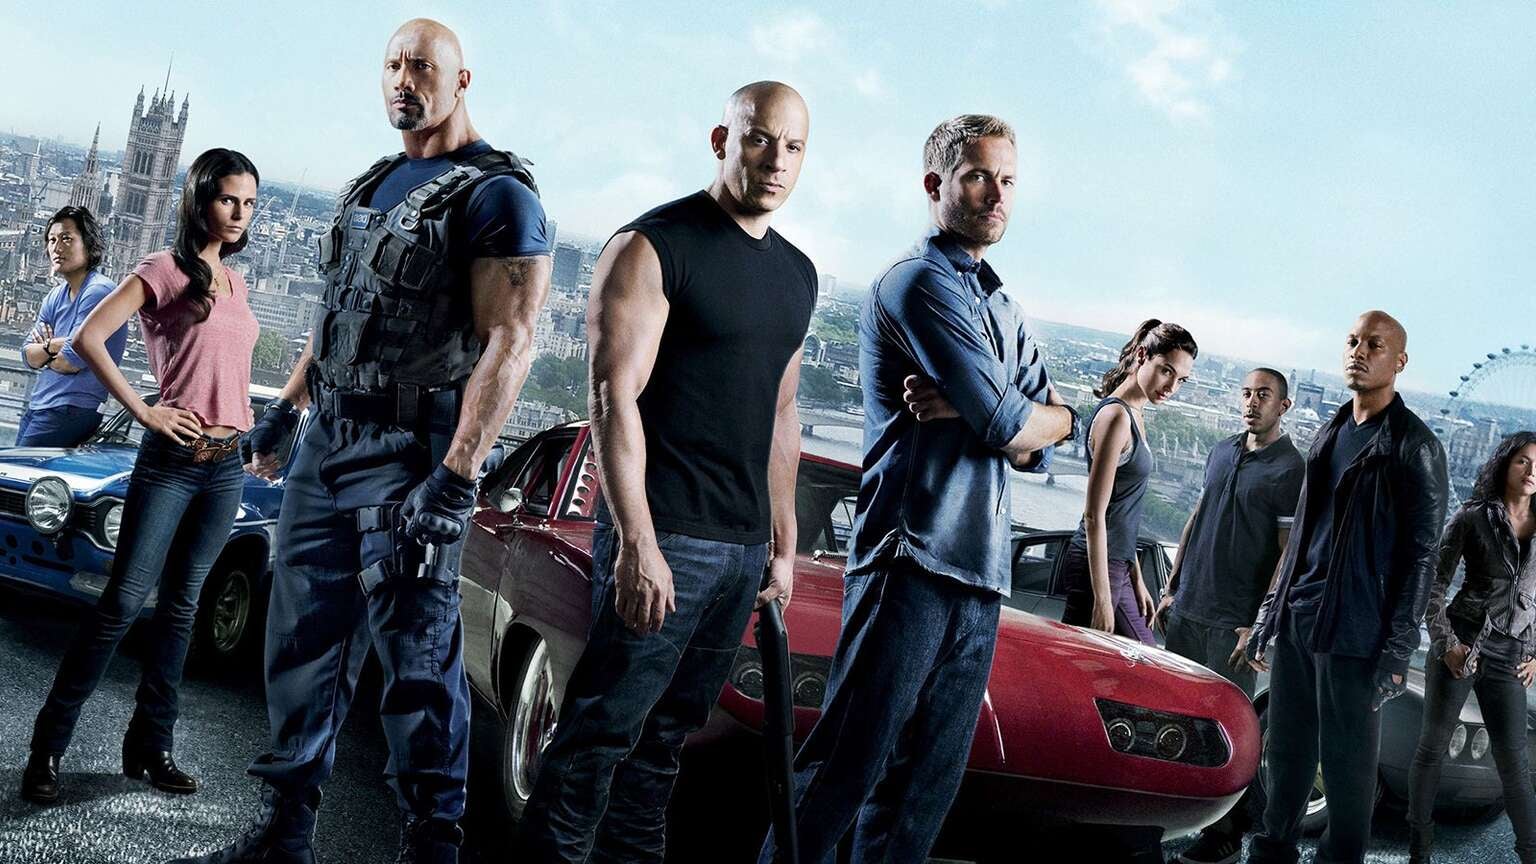 fast and furious 6 full movie online streaming free